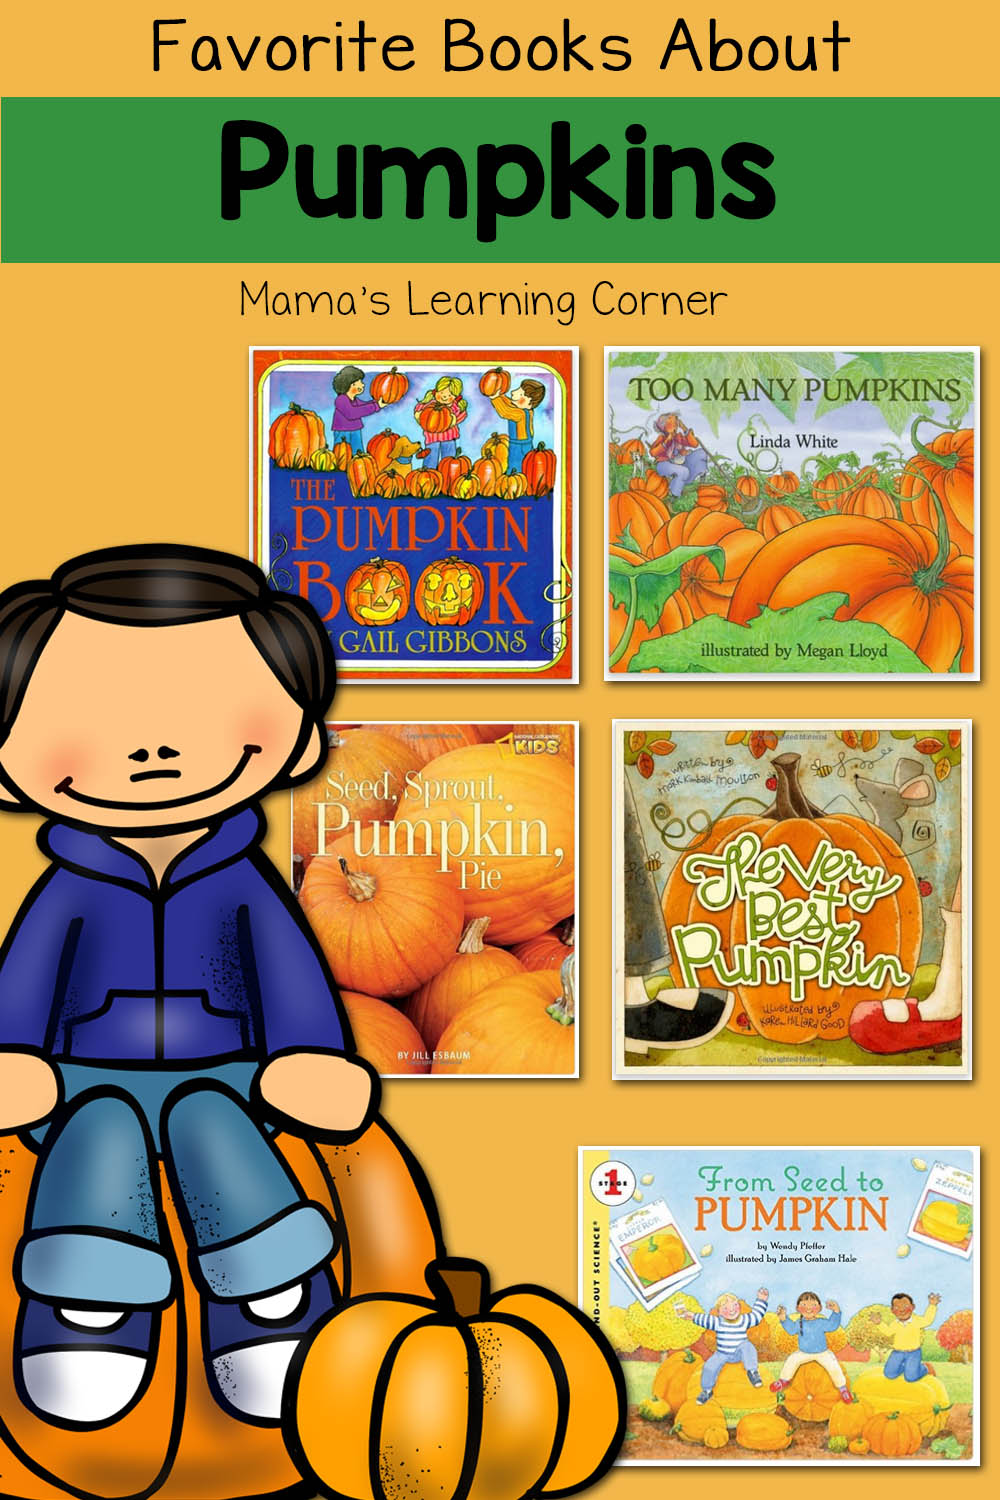 Our Favorite Books About Pumpkins